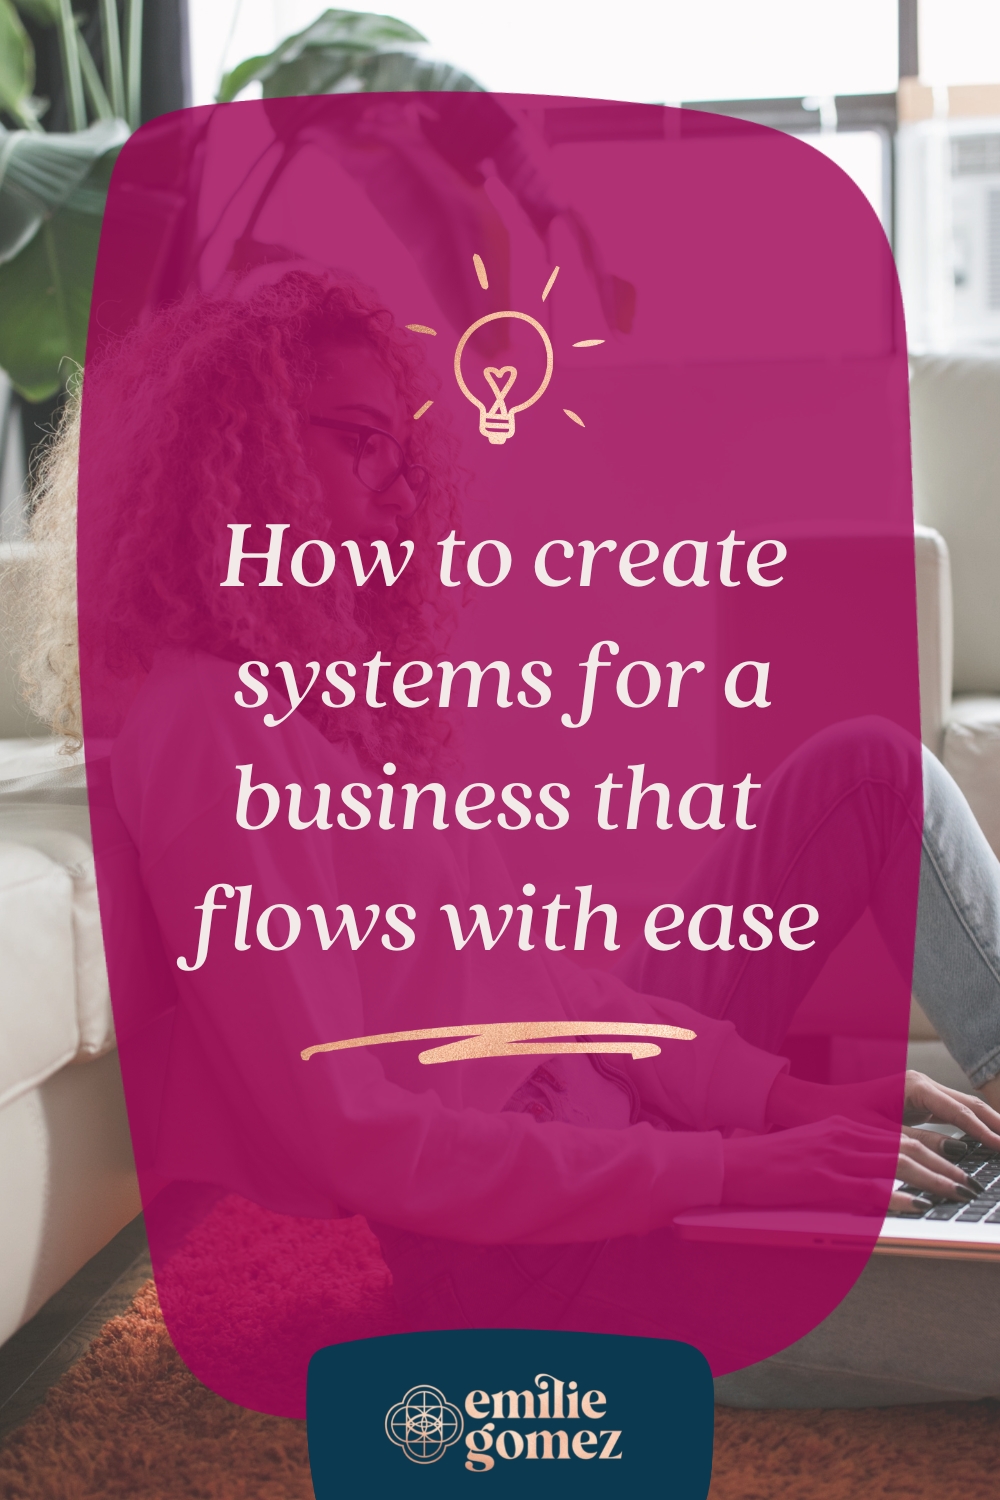 Systems are key to a business that flows with ease and grace. And they are unique to you. Read this post to find out how to create systems to make your business flow with ease and grace. #onlinebusiness #systems #entrepreneur